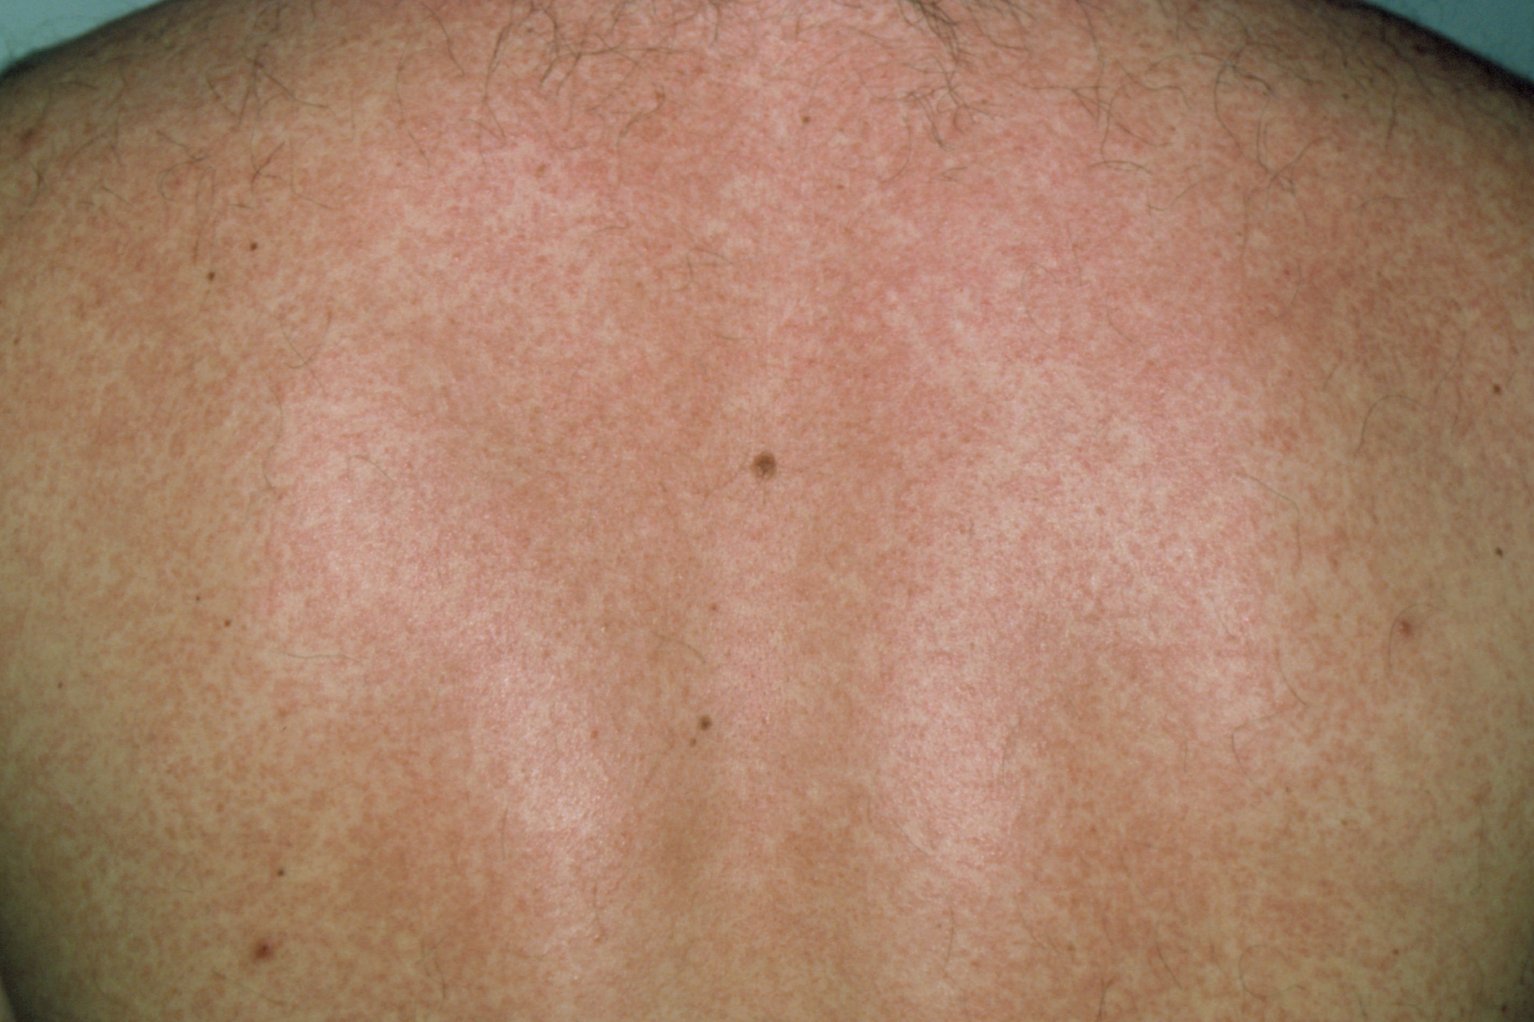 salicylic acid for pinpoint red dots on skin